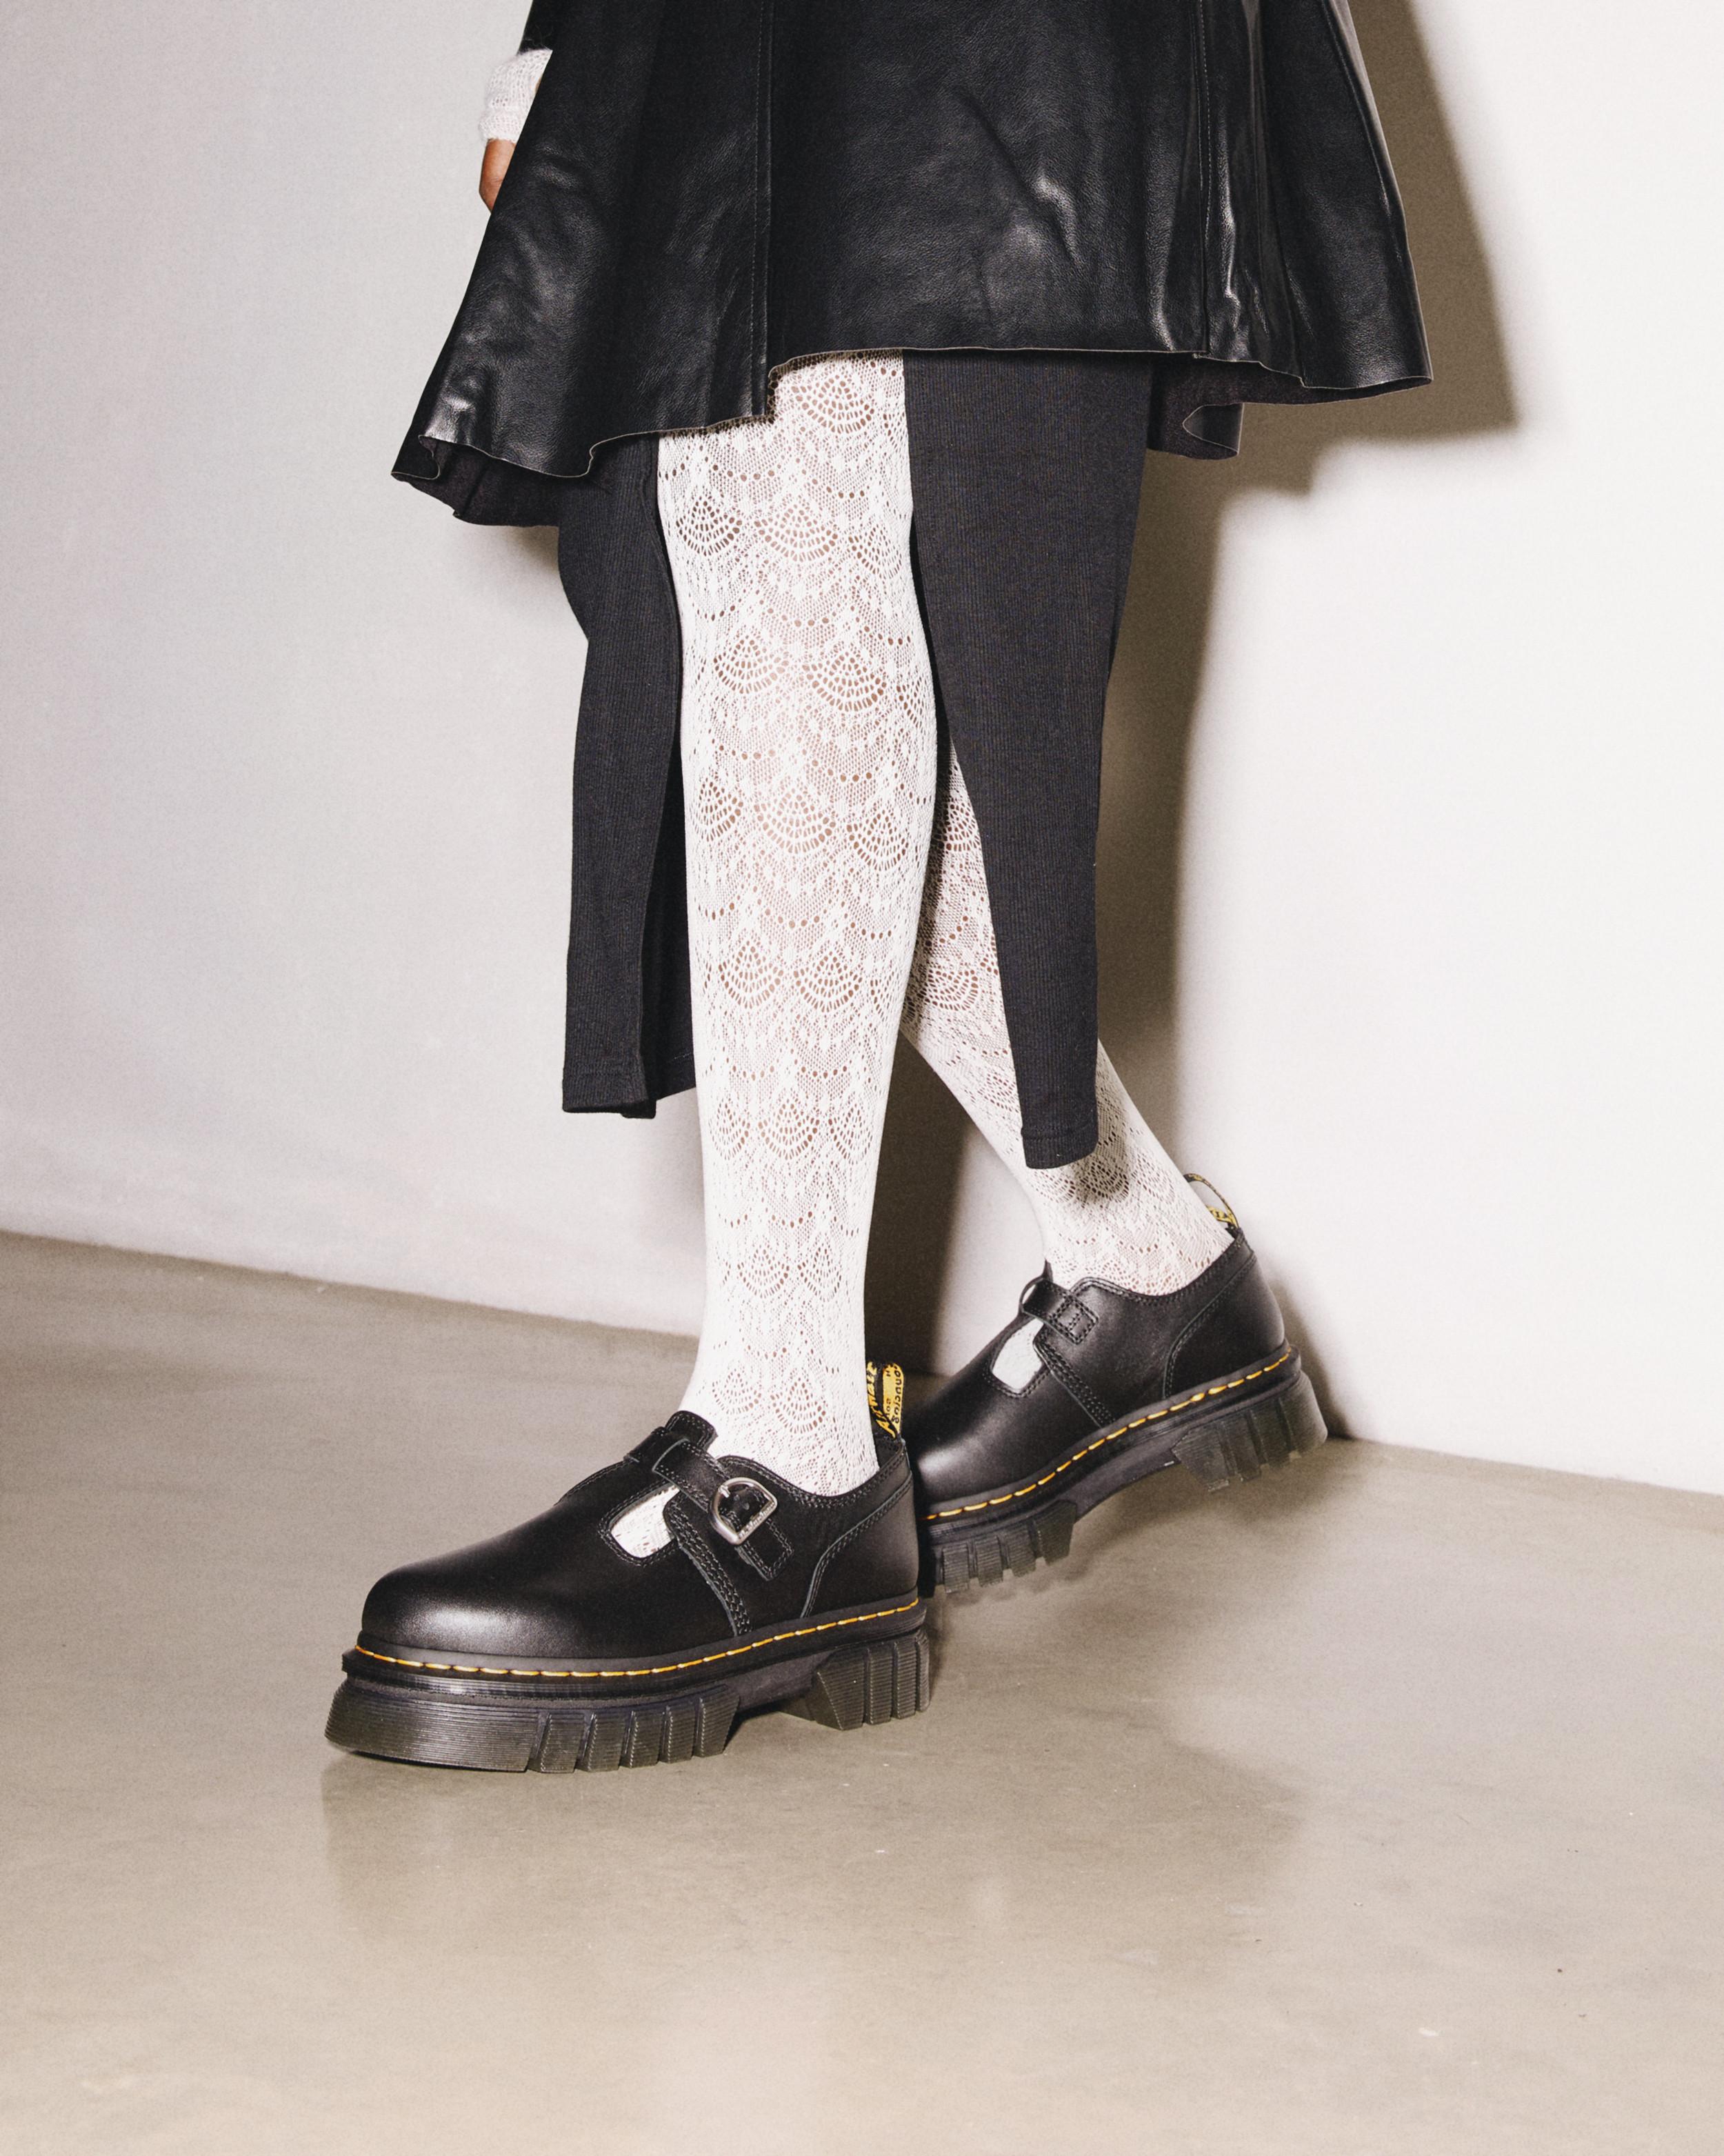 DR MARTENS Audrick Nappa Lux Platform Mary Jane Shoes